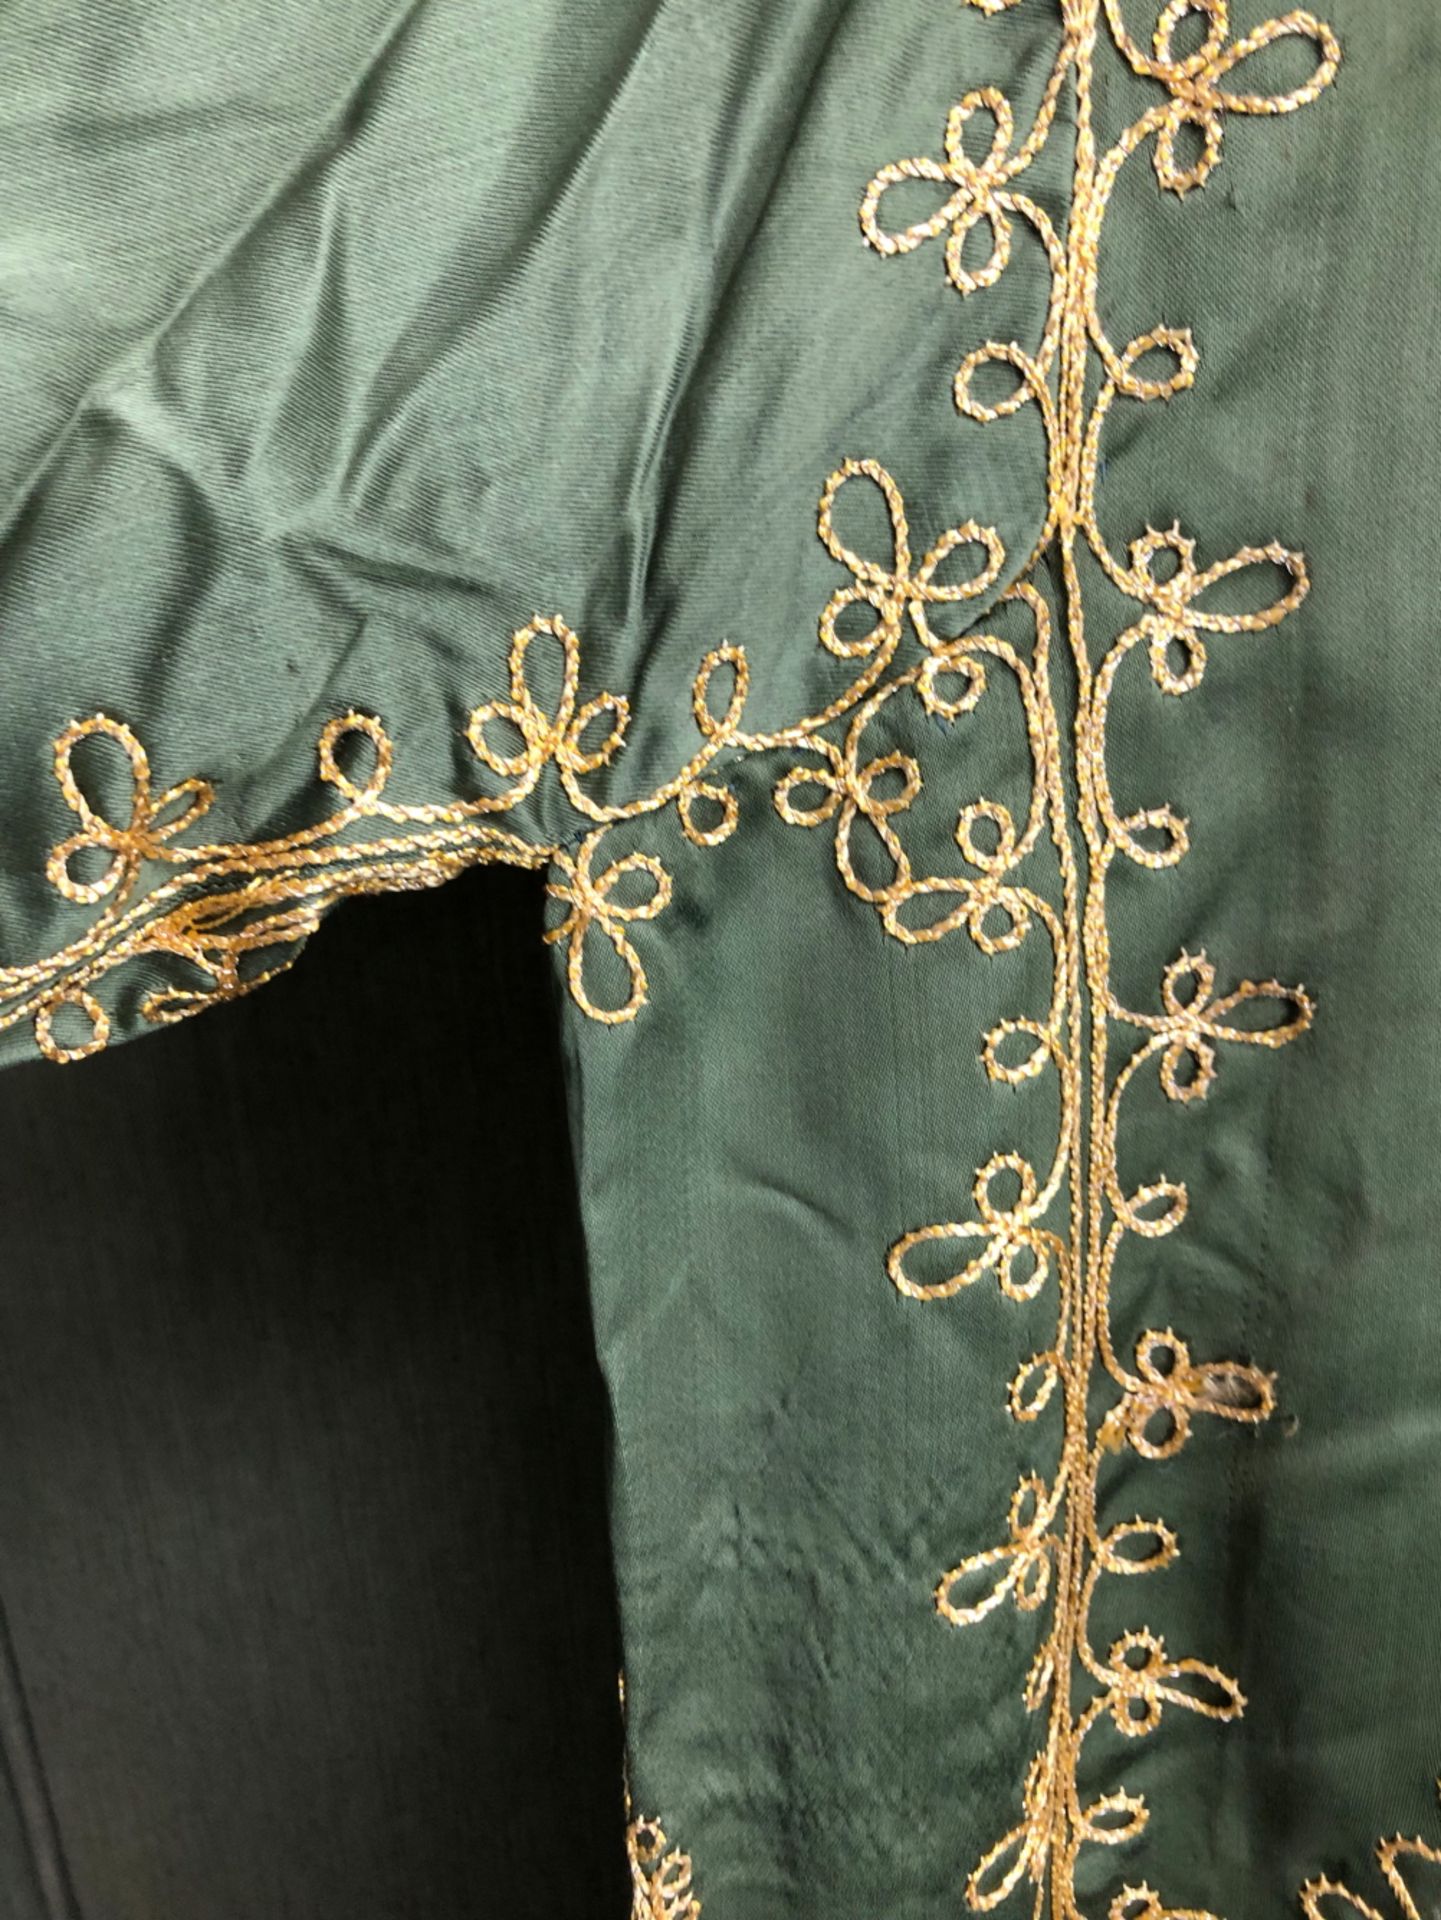 JACKET, AN INDIAN GREEN SILK JACKET EMBROIDERED IN GOLD THREAD, SLEEVE LENGTH 48cms, NECK TO HEM - Image 3 of 10